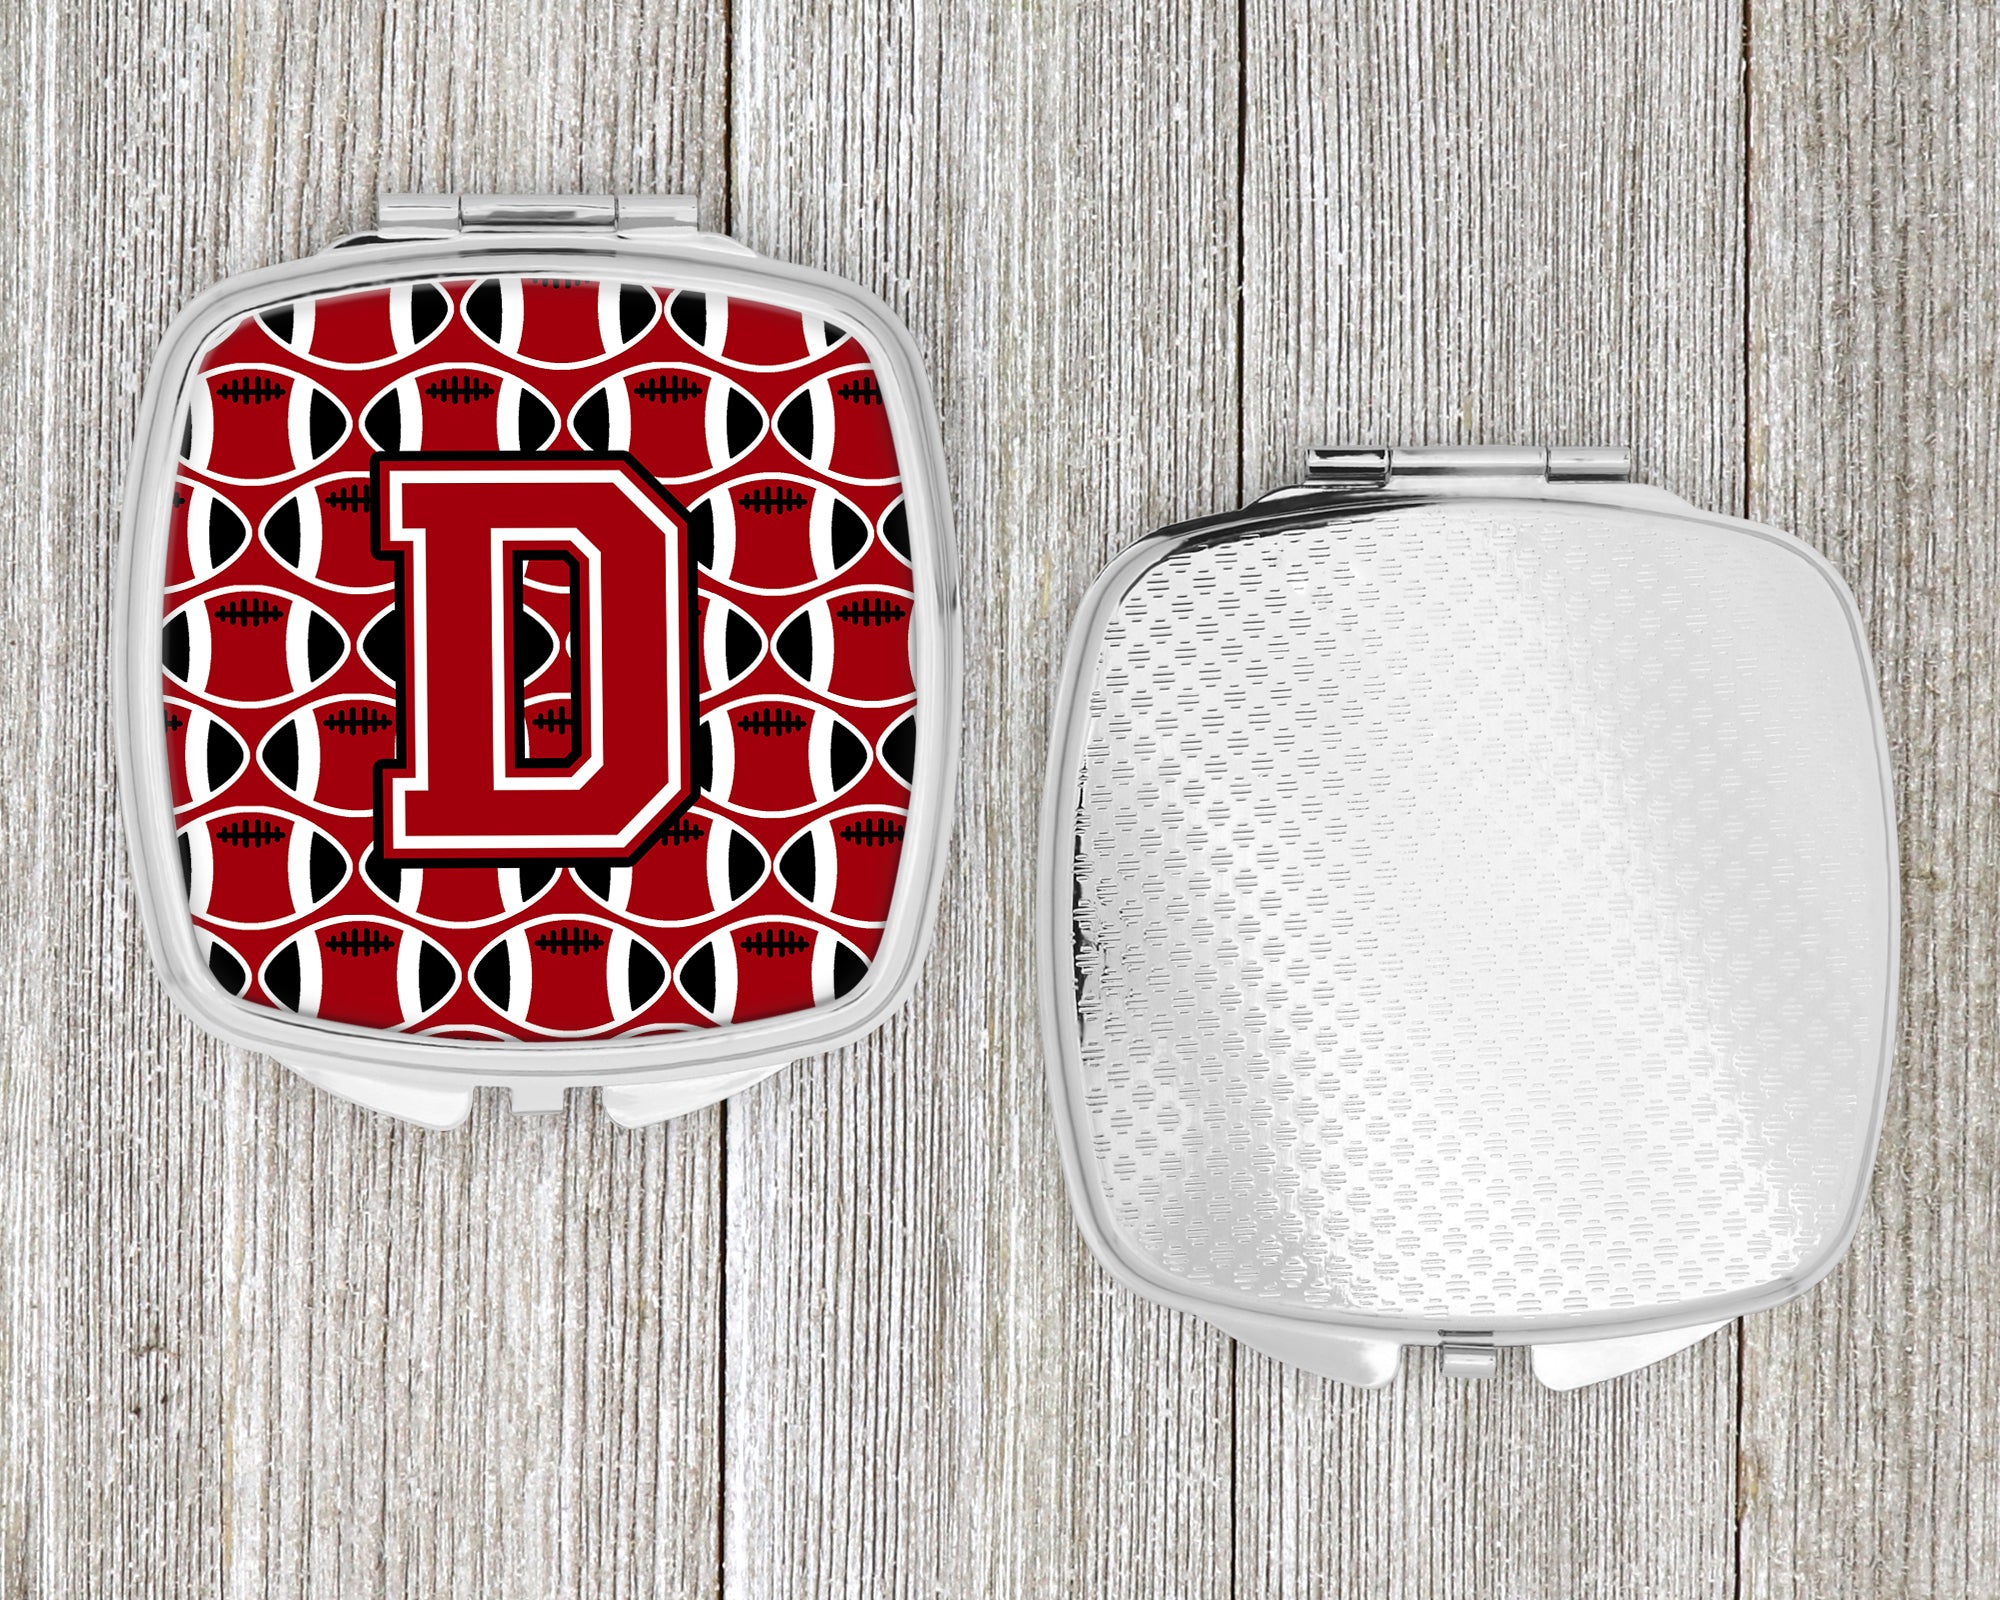 Letter D Football Red, Black and White Compact Mirror CJ1073-DSCM  the-store.com.